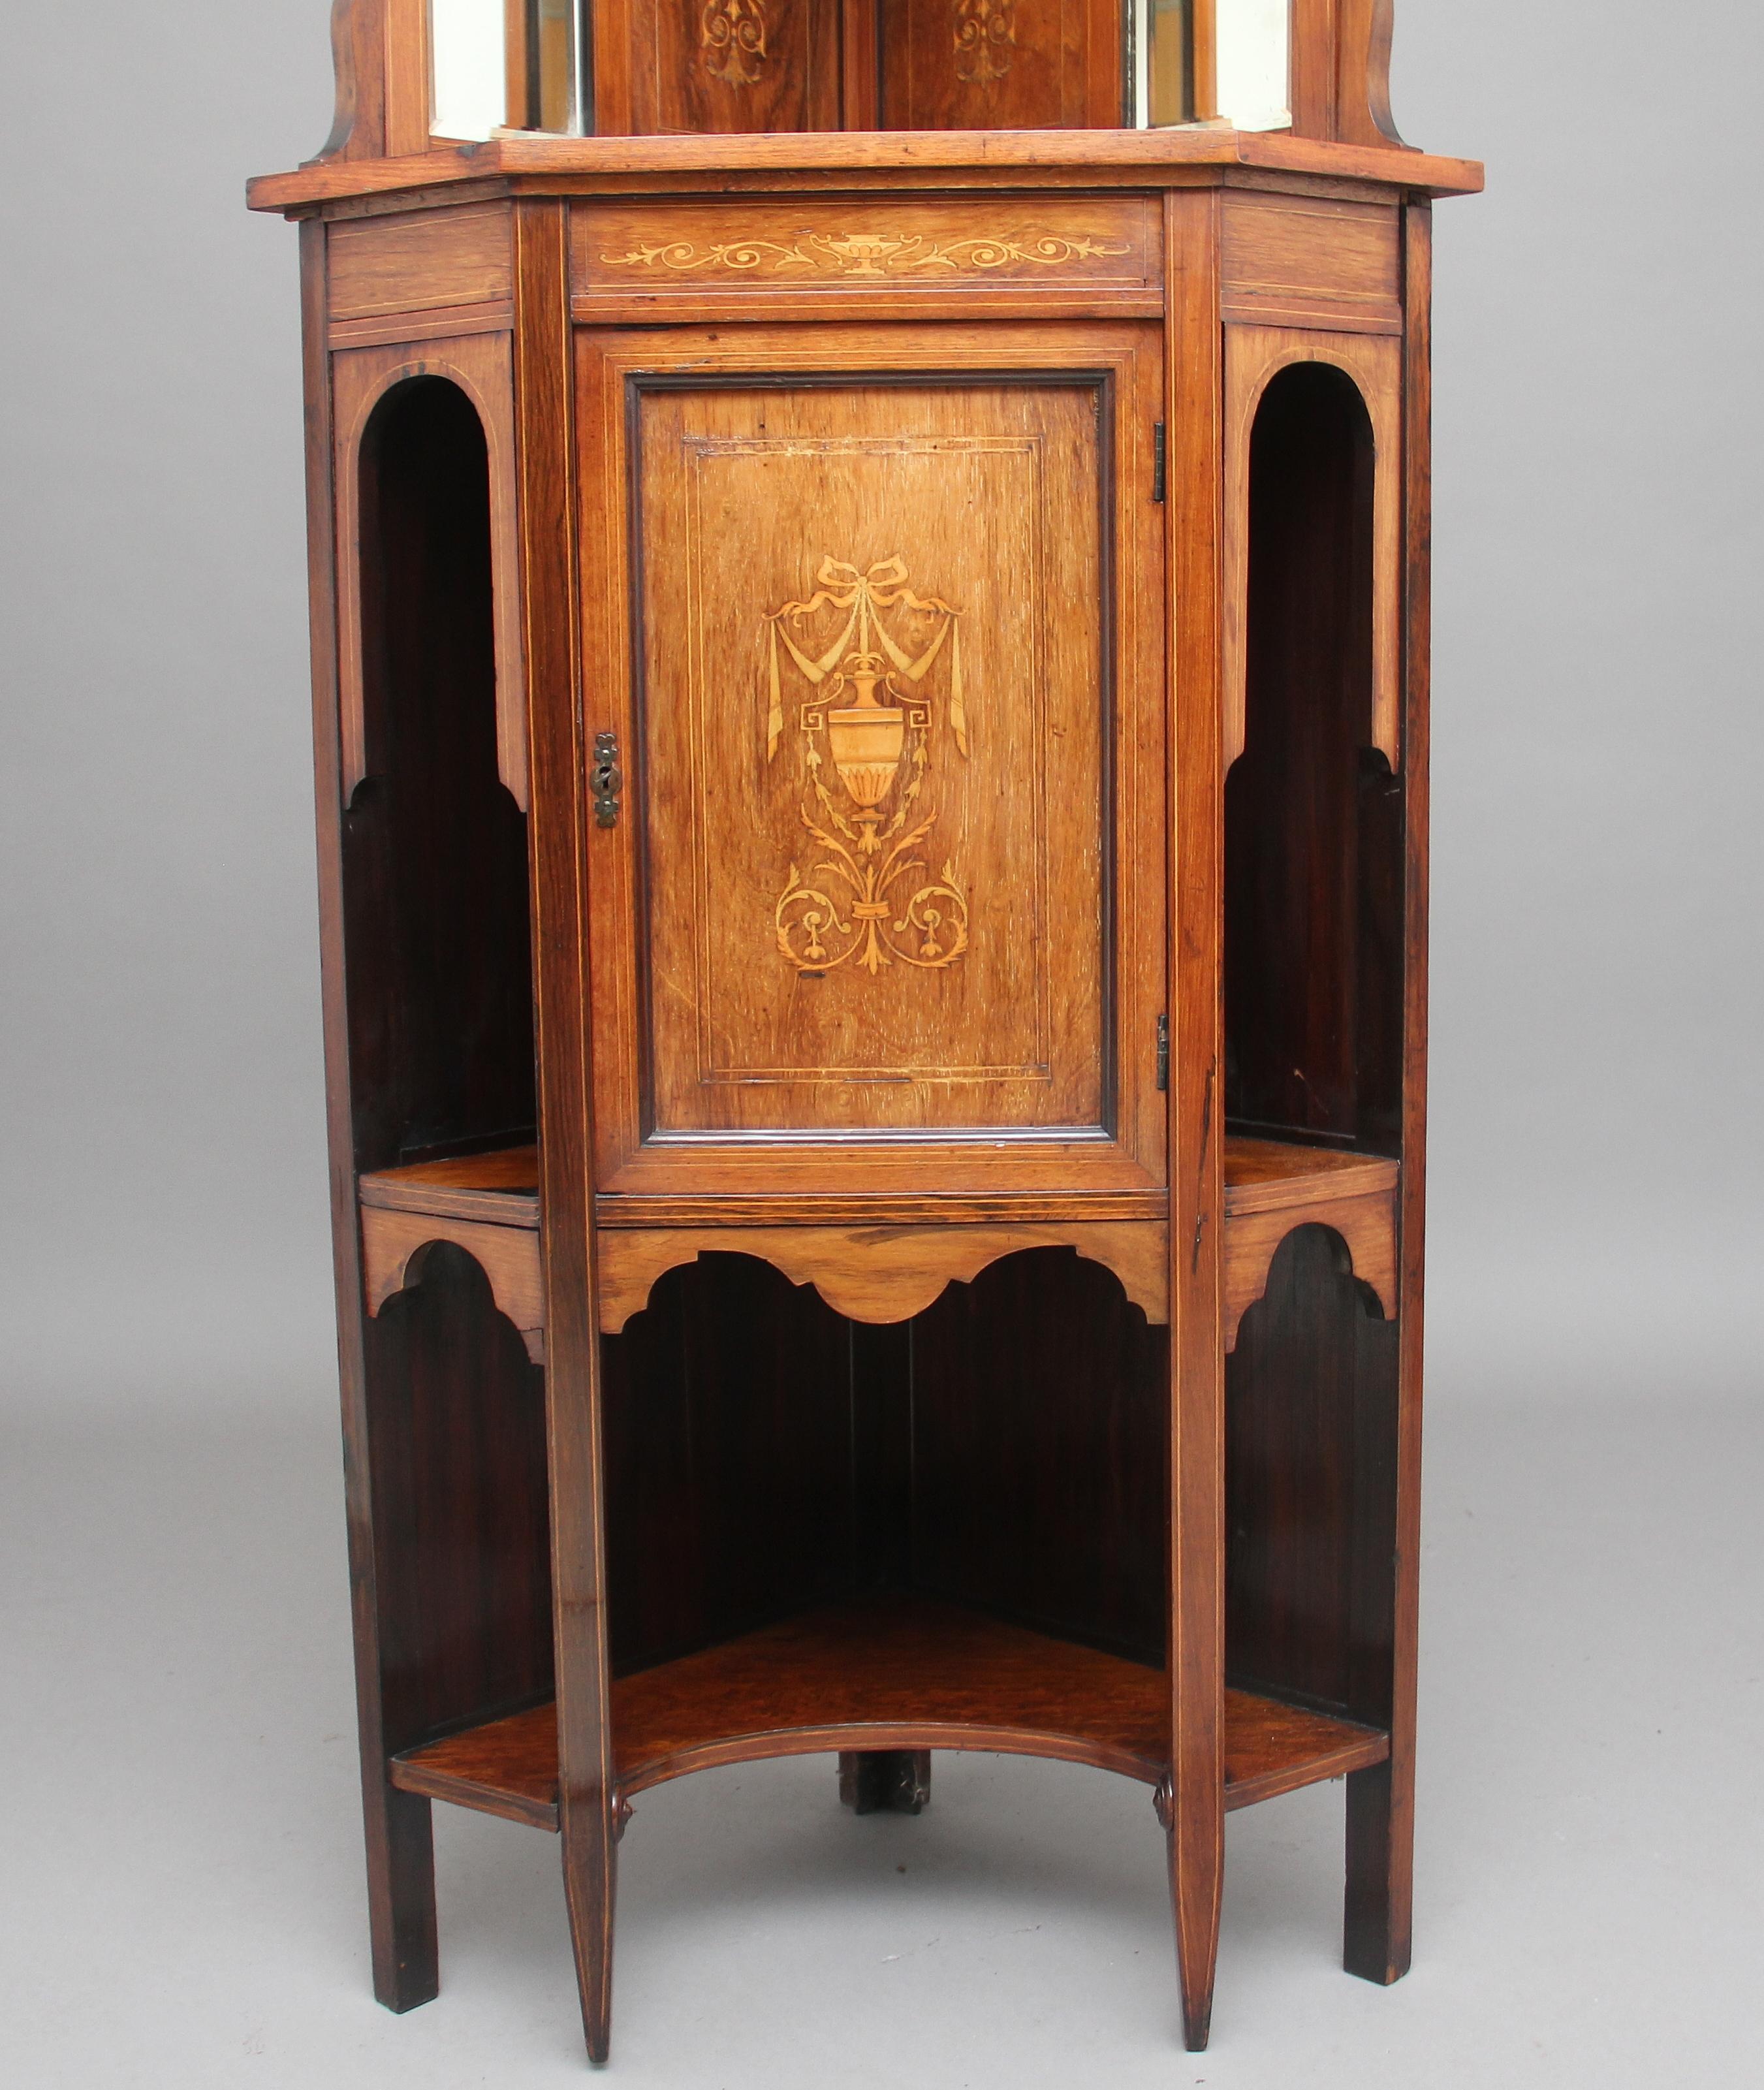 Rosewood Early 20th Century Inlaid Corner Cabinet